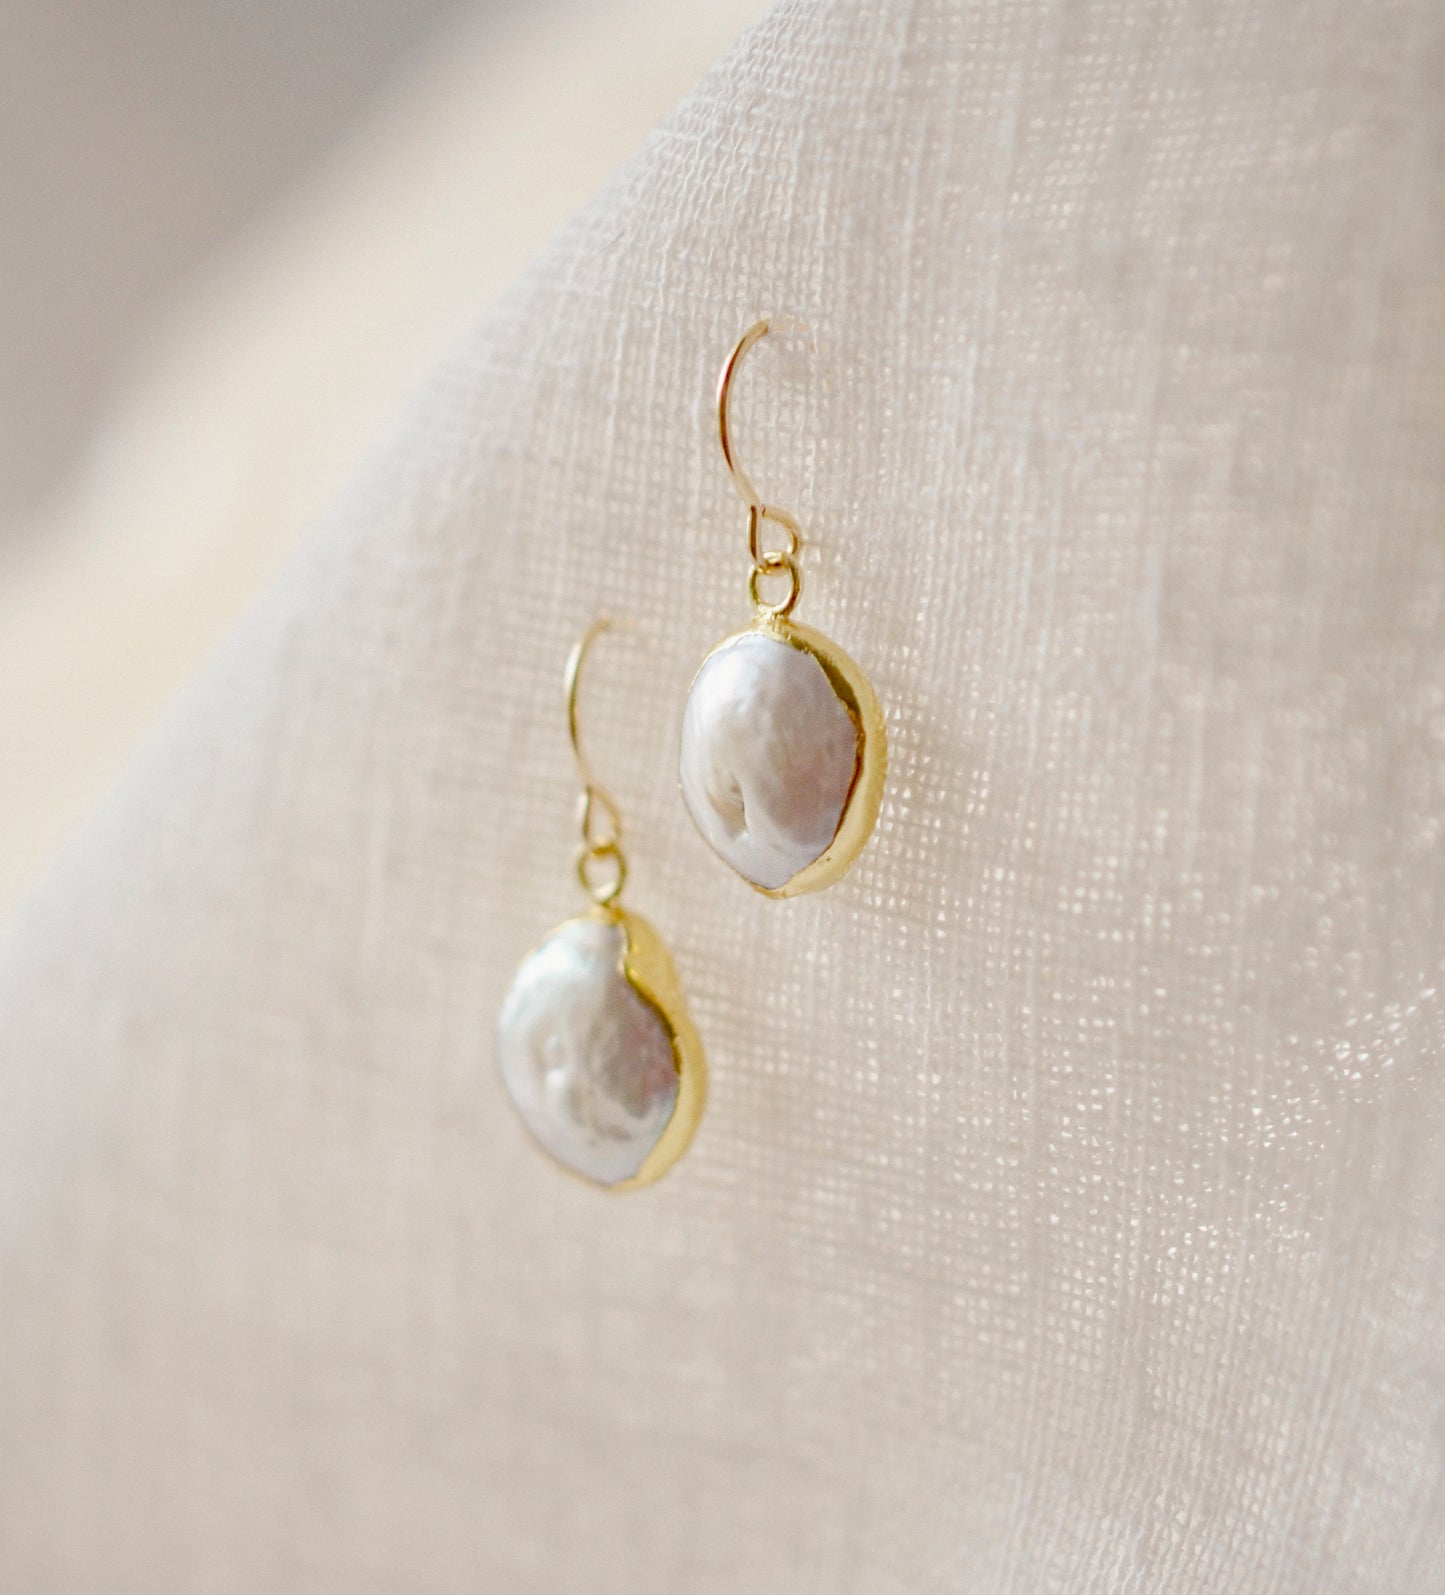 Natural white freshwater pearl dangle earring. The pearl is set in 22k gold electroplate and suspended from 14k gold filled earwires.